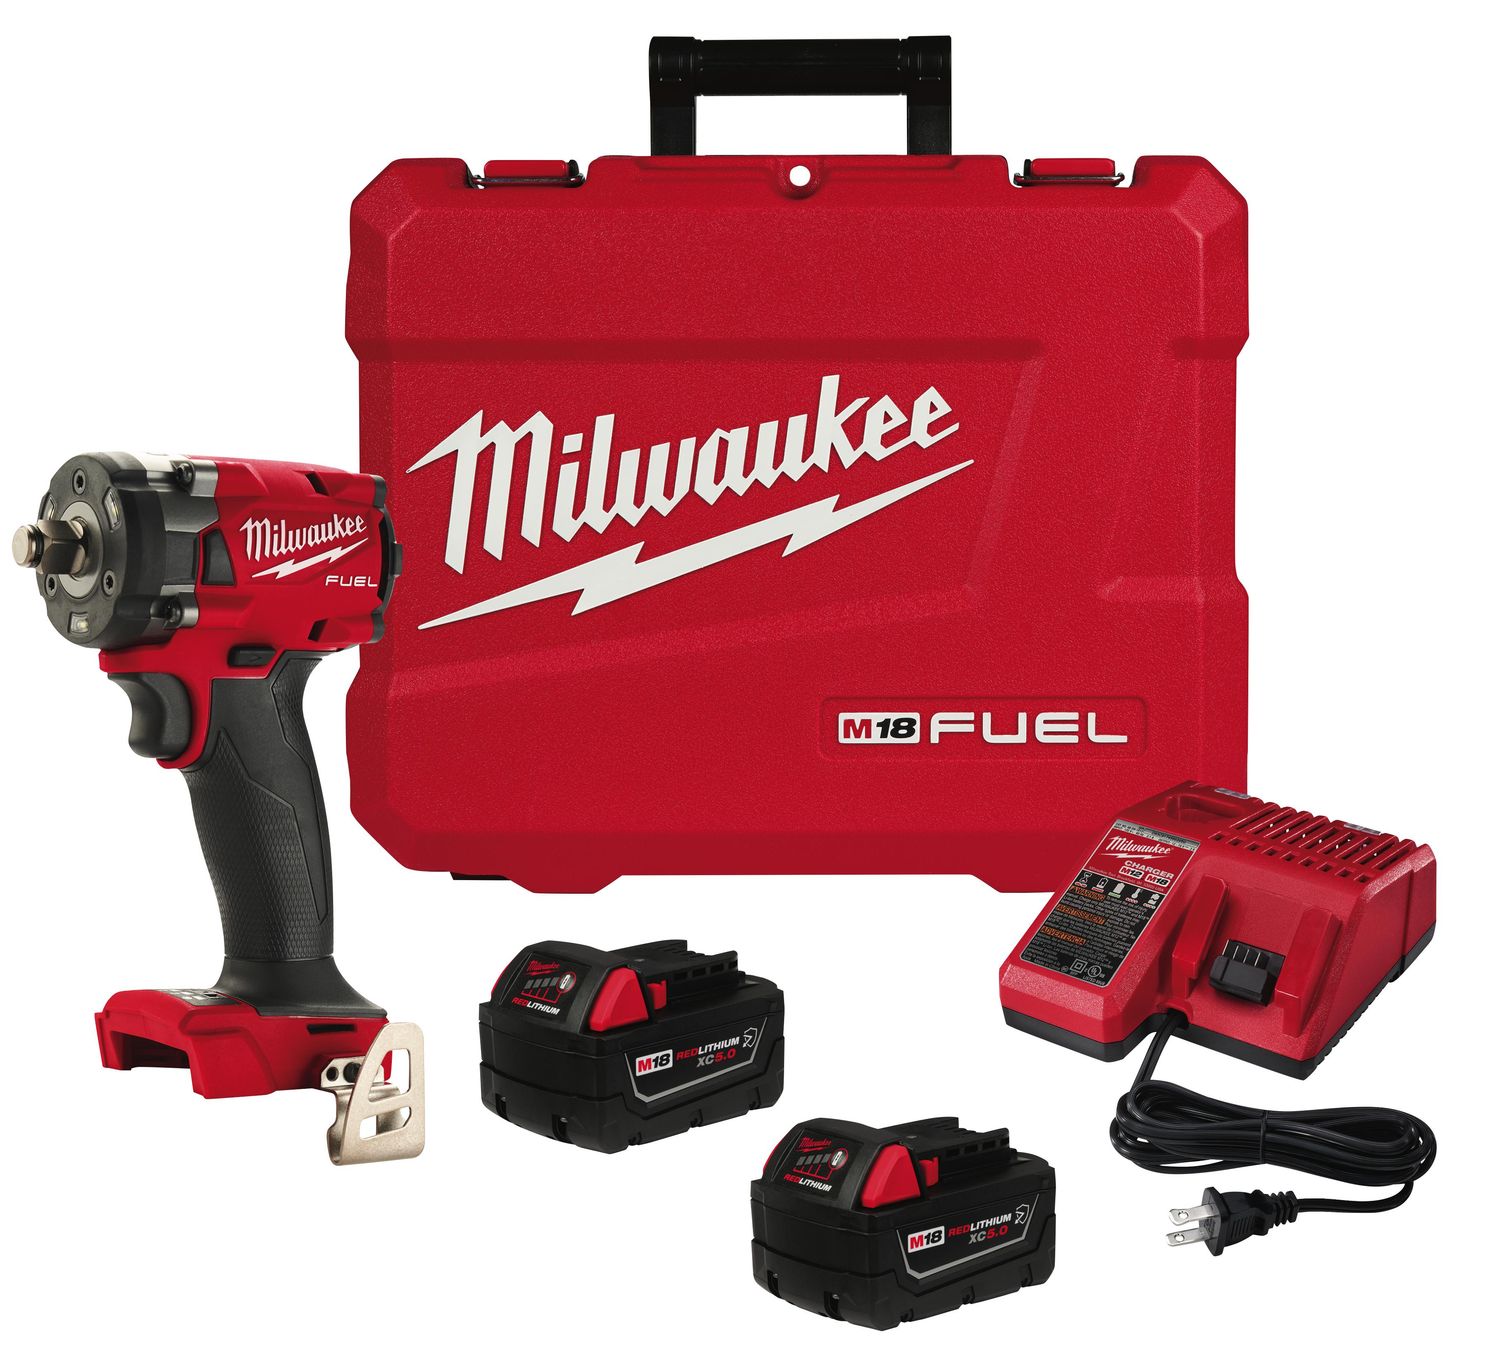 MWE285522R - M18 FUEL™ 1/2" Compact Impact Wrench Kit